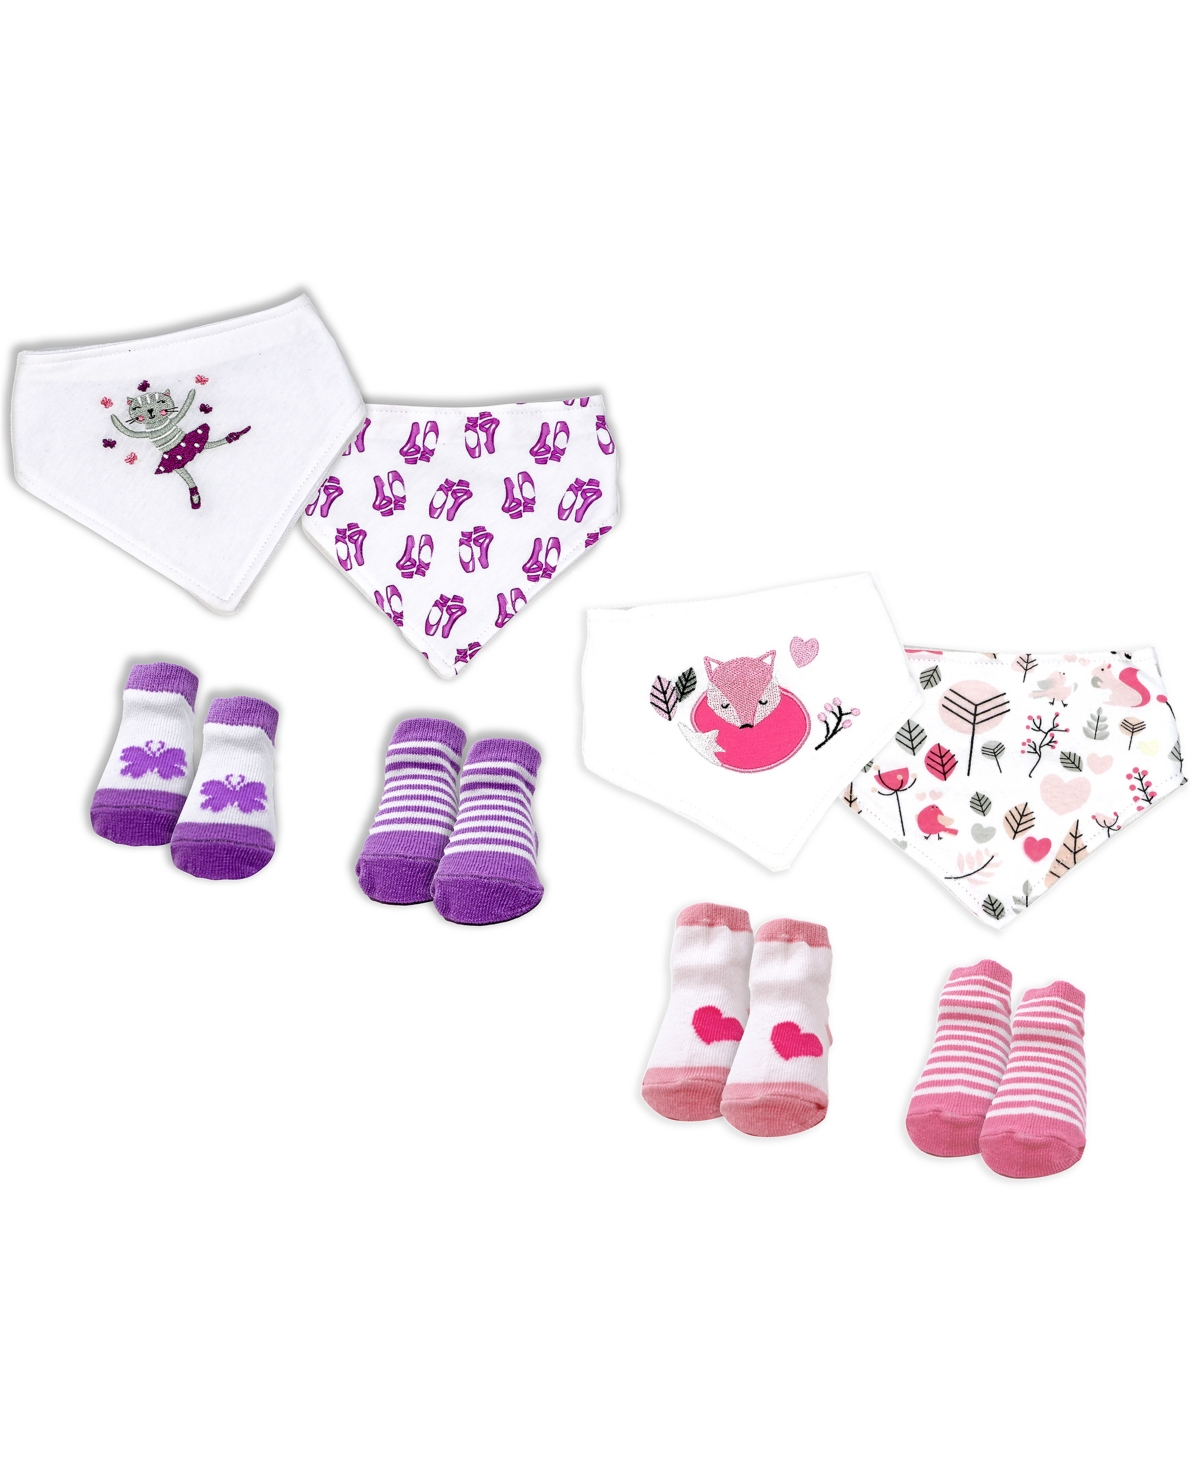 Baby Mode Baby Girls Closure Bibs And Socks, 8 Piece Set In Pink Foxes